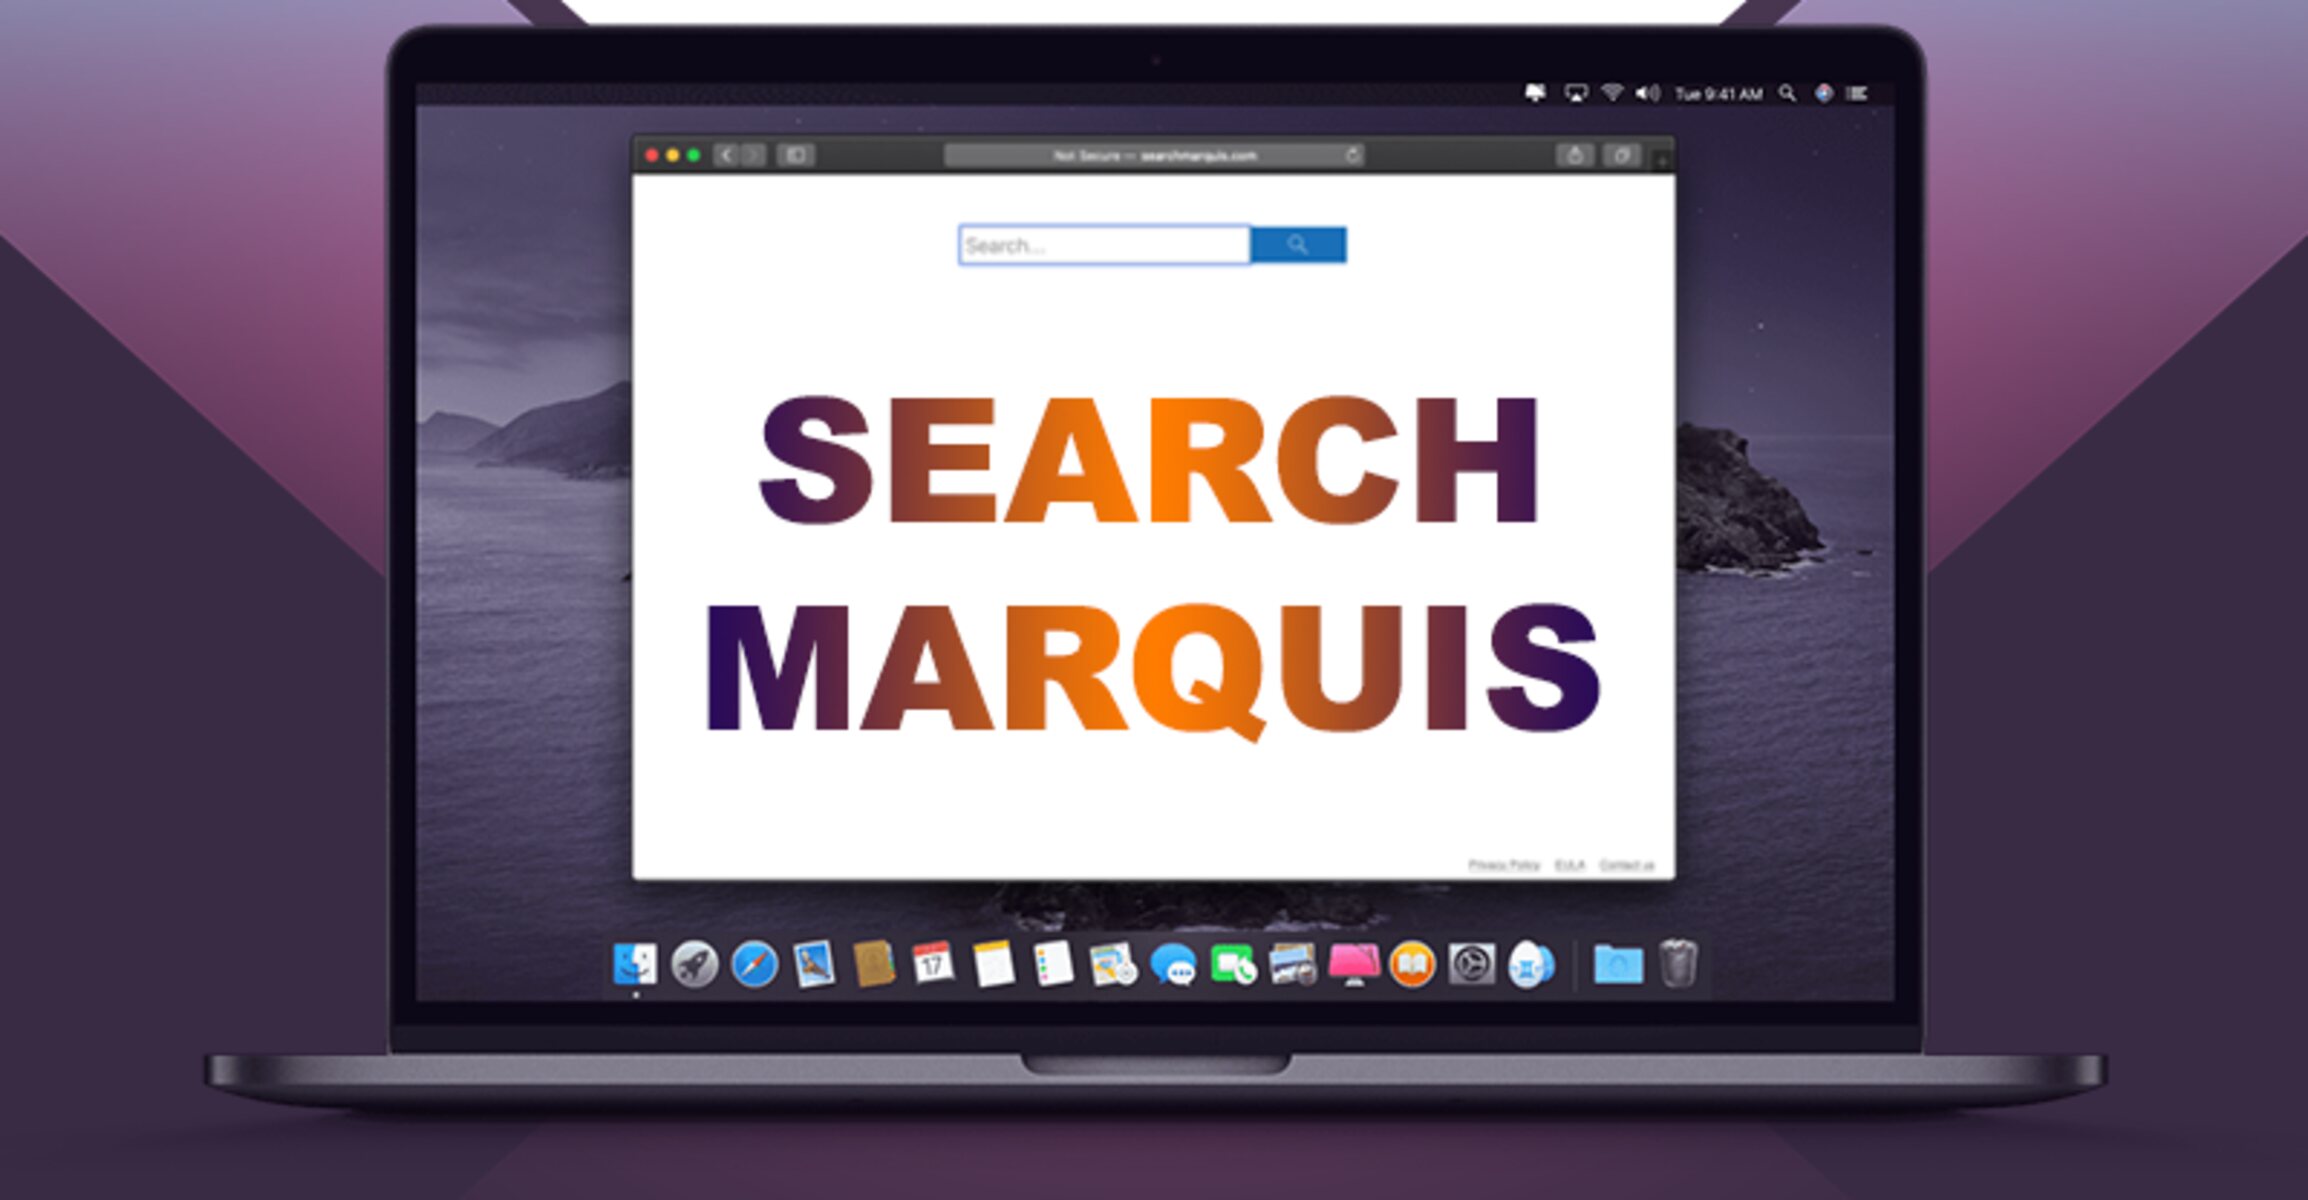 How To Remove Search Marquis From Safari On Mac